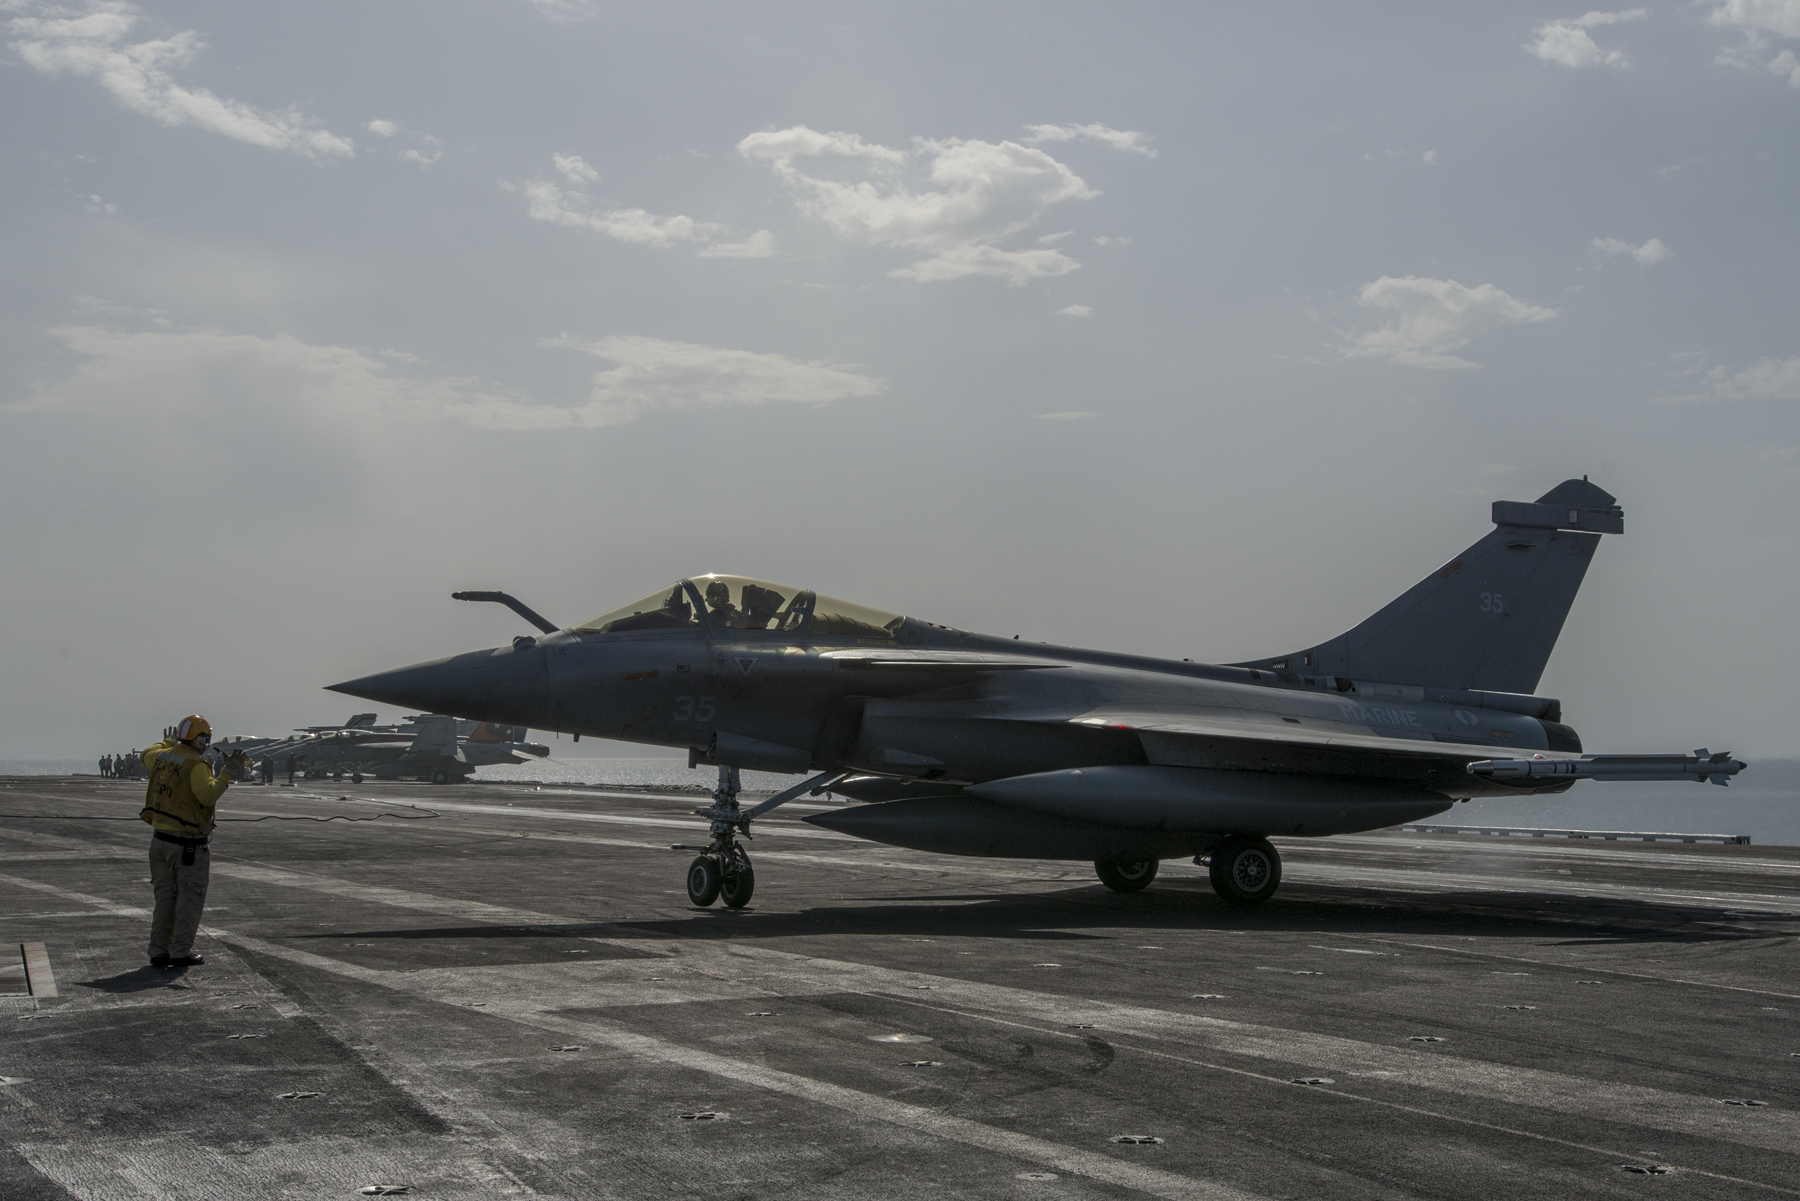 A French navy Rafale Marine aircraft from French navy nuclear-powered aircraft carrier Charles de Gaulle (R91) during carrier qualifications aboard carrier USS Carl Vinson (CVN-70). US Navy Photo